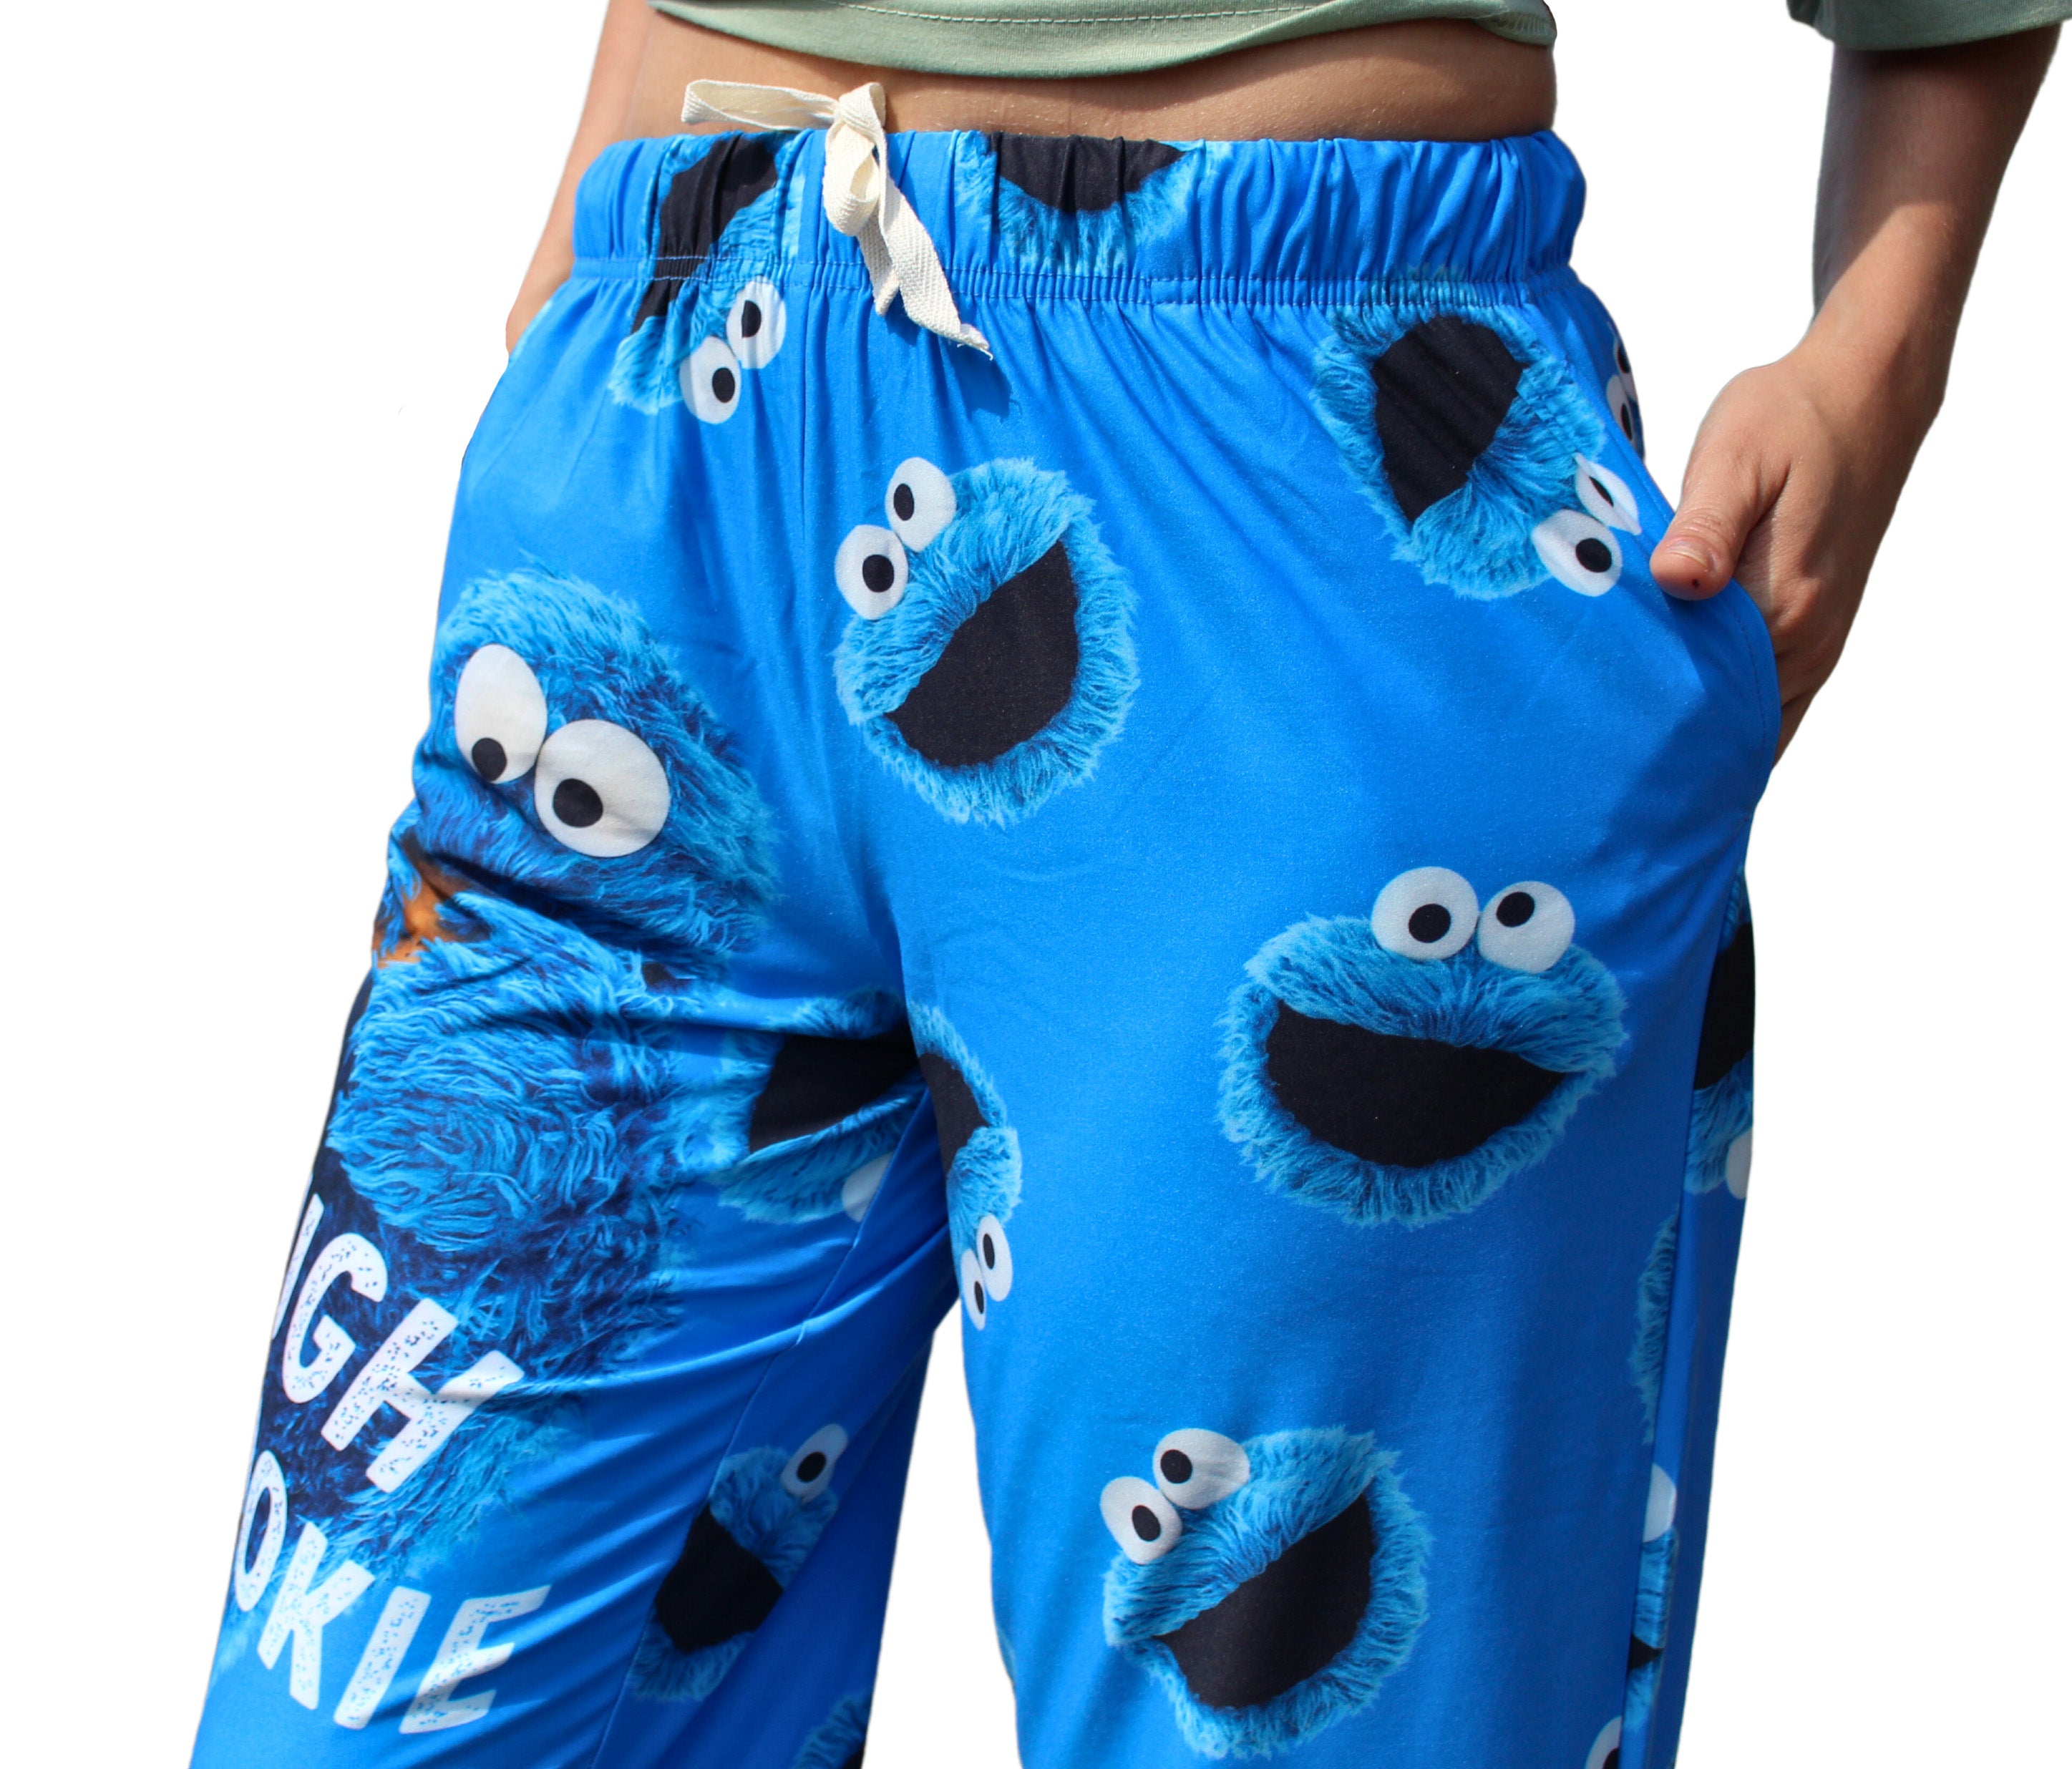 Tough Cookie Pajama Lounge Pants close up view of cookie monster head graphics (upper left pant leg)